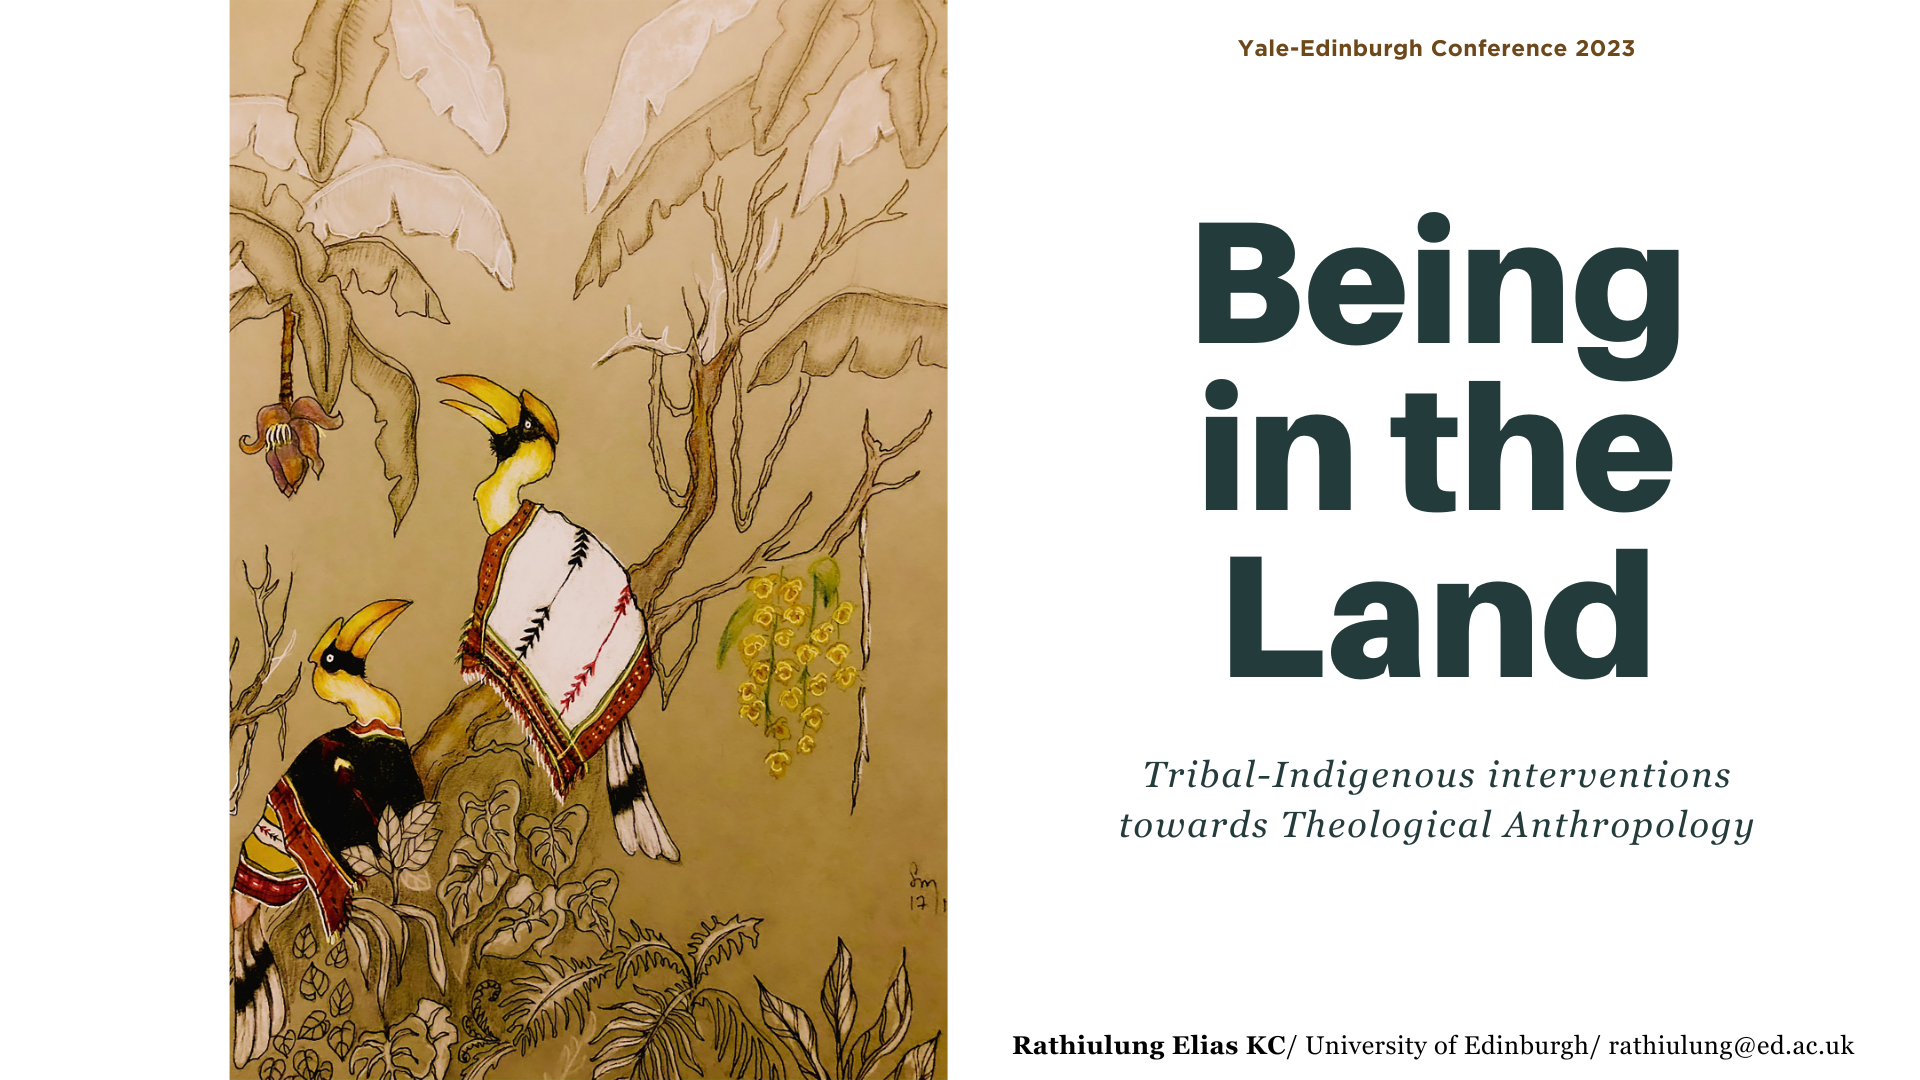 Yale-Edinburgh 2023 “Being in the Land: Tribal-Indigenous Interventions towards Theological Anthropology.”